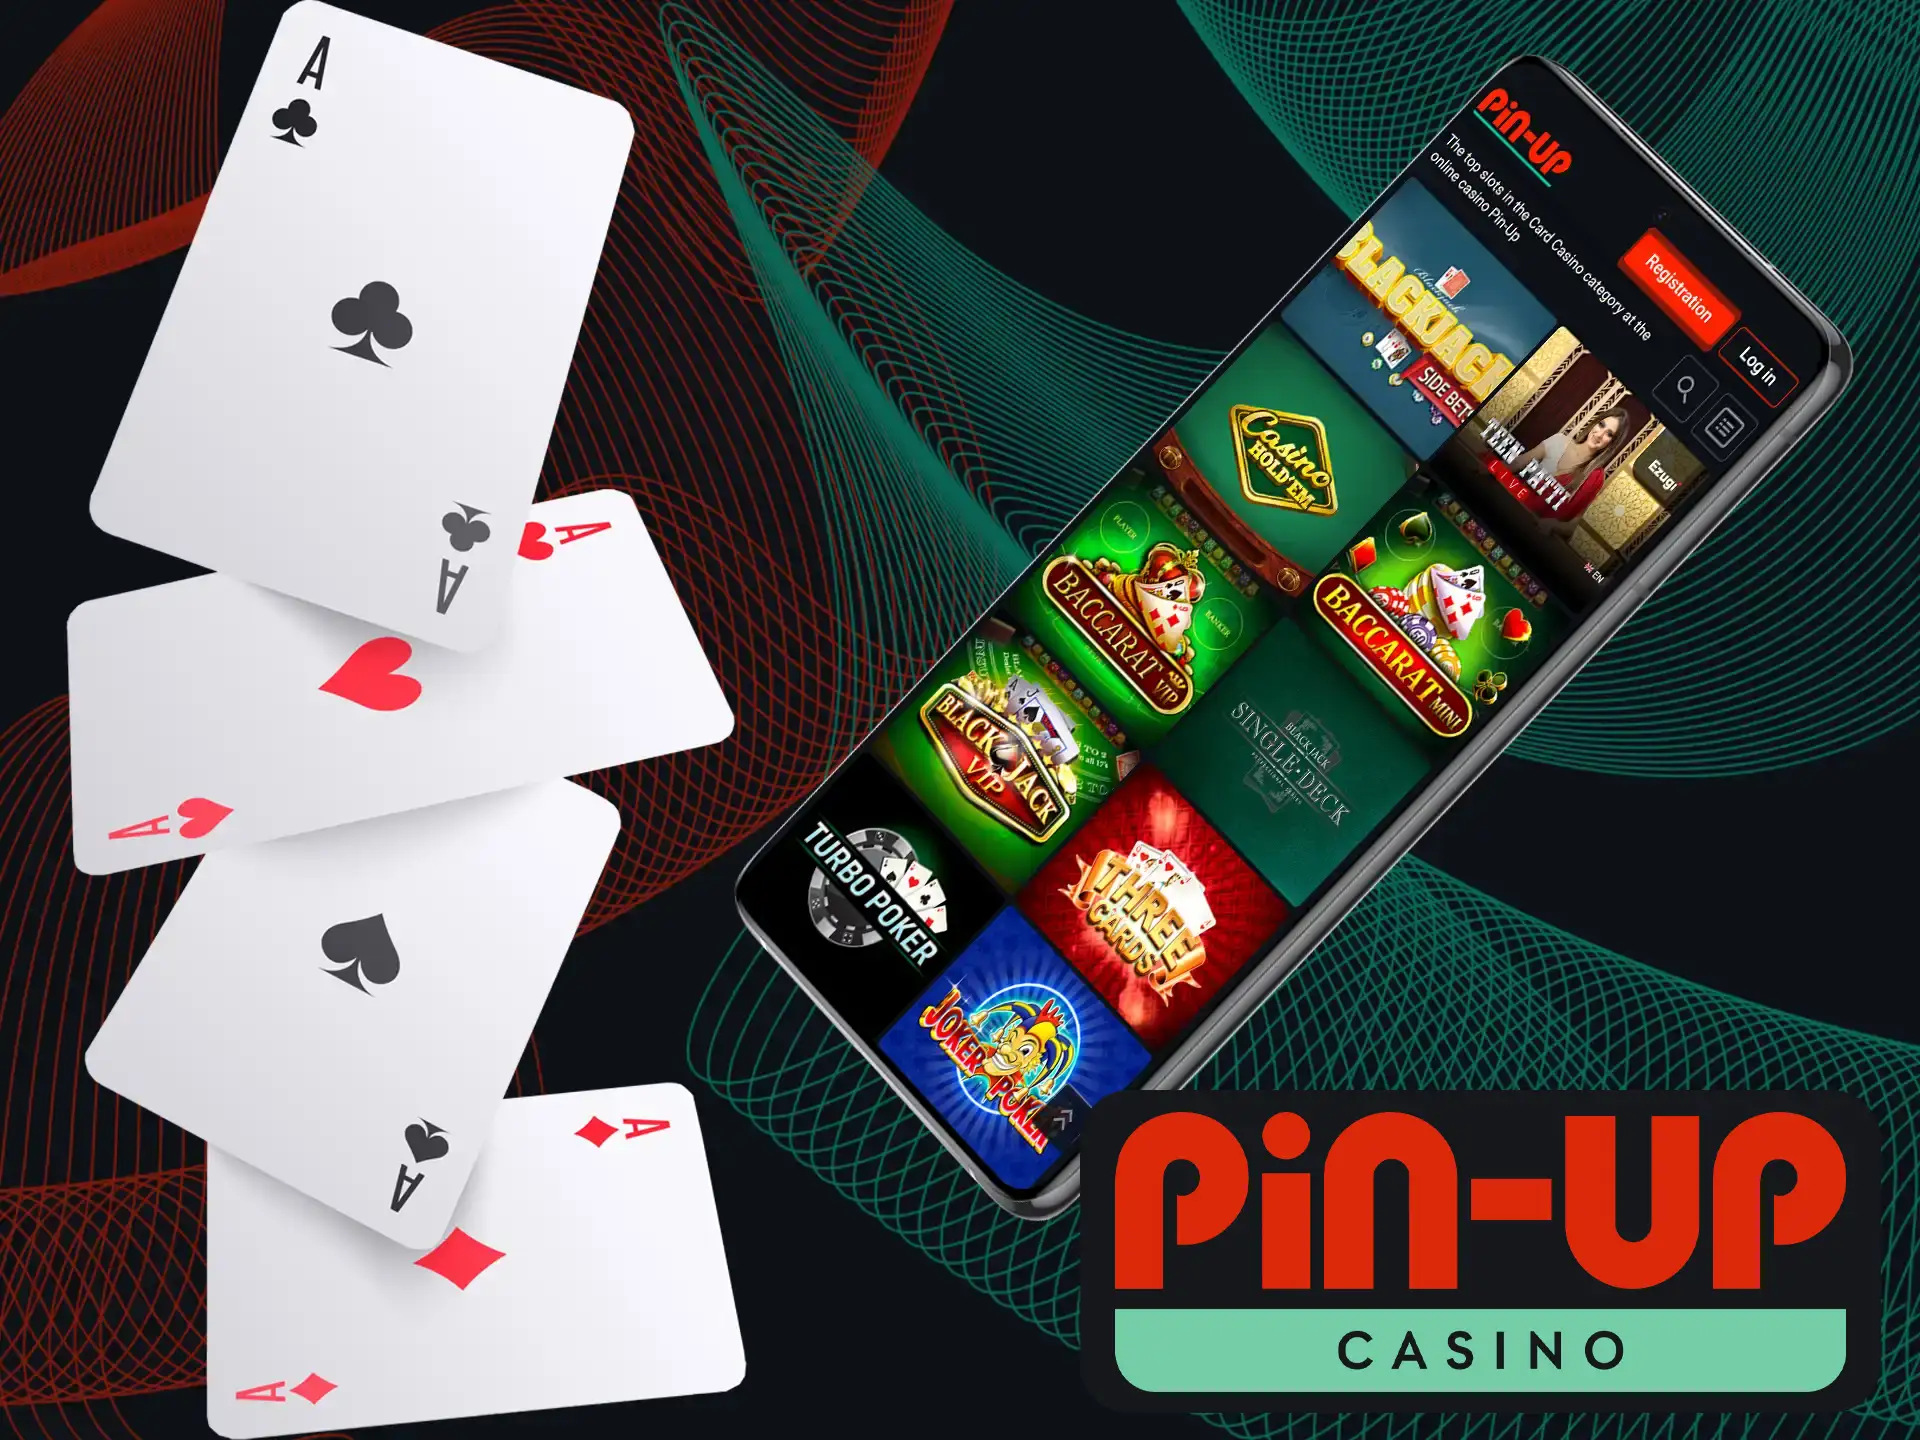 Playing poker at Pin-Up Casino is easier compared to traditional poker rooms because you don't have to compete against other players for rewards.